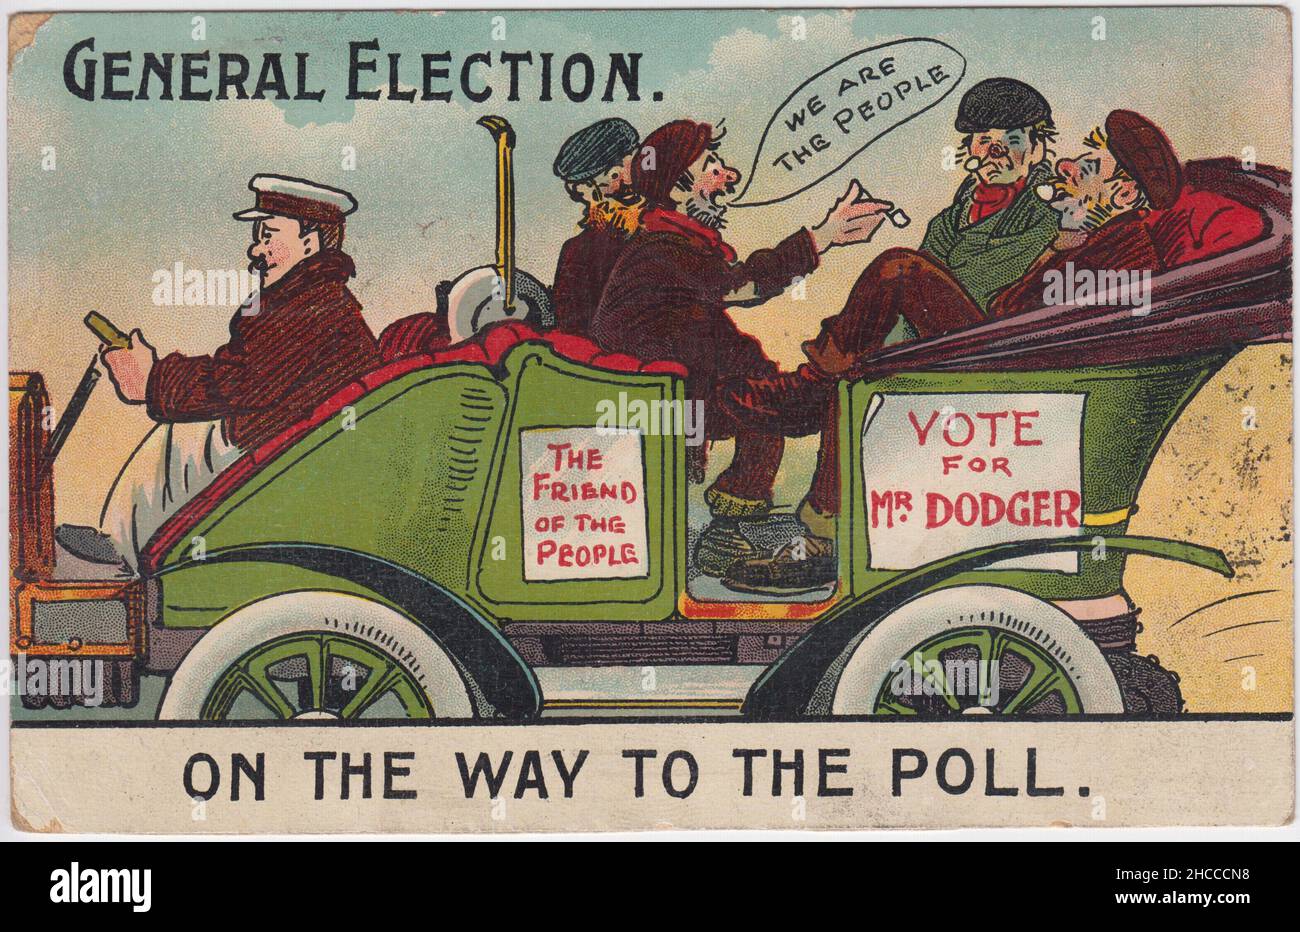 'General Election. On the way to the poll.' 1910 general election cartoon attacking candidates of the relatively new Labour Party. It shows four scruffy, unshaven men smoking clay pipes being chauffeured in a motor car. The car is decorated with posters saying 'The friend of the people' and 'Vote for Mr Dodger' and one of the men is saying 'We are the people'. The image was one of a series of political cartoons published as postcards Stock Photo